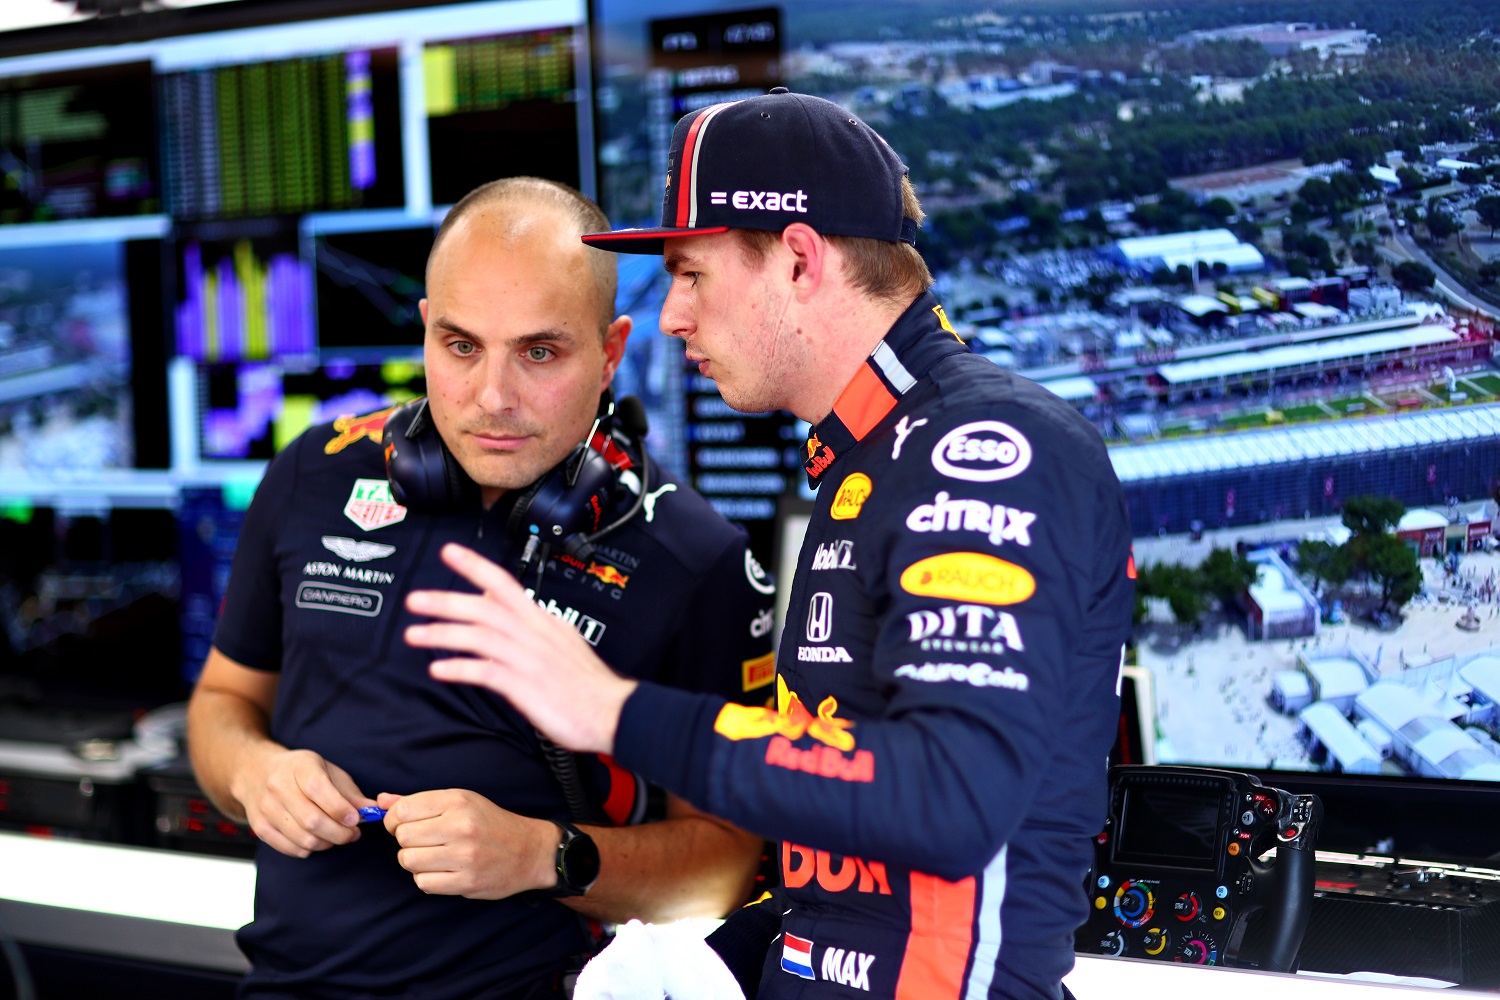 Max Verstappen, right, confers with Red Bull Racing race engineer Gianpiero Lambiase in the garage during practice for the Formula 1 Grand Prix of France at Circuit Paul Ricard on June 21, 2019. | Dan Istitene/Getty Images